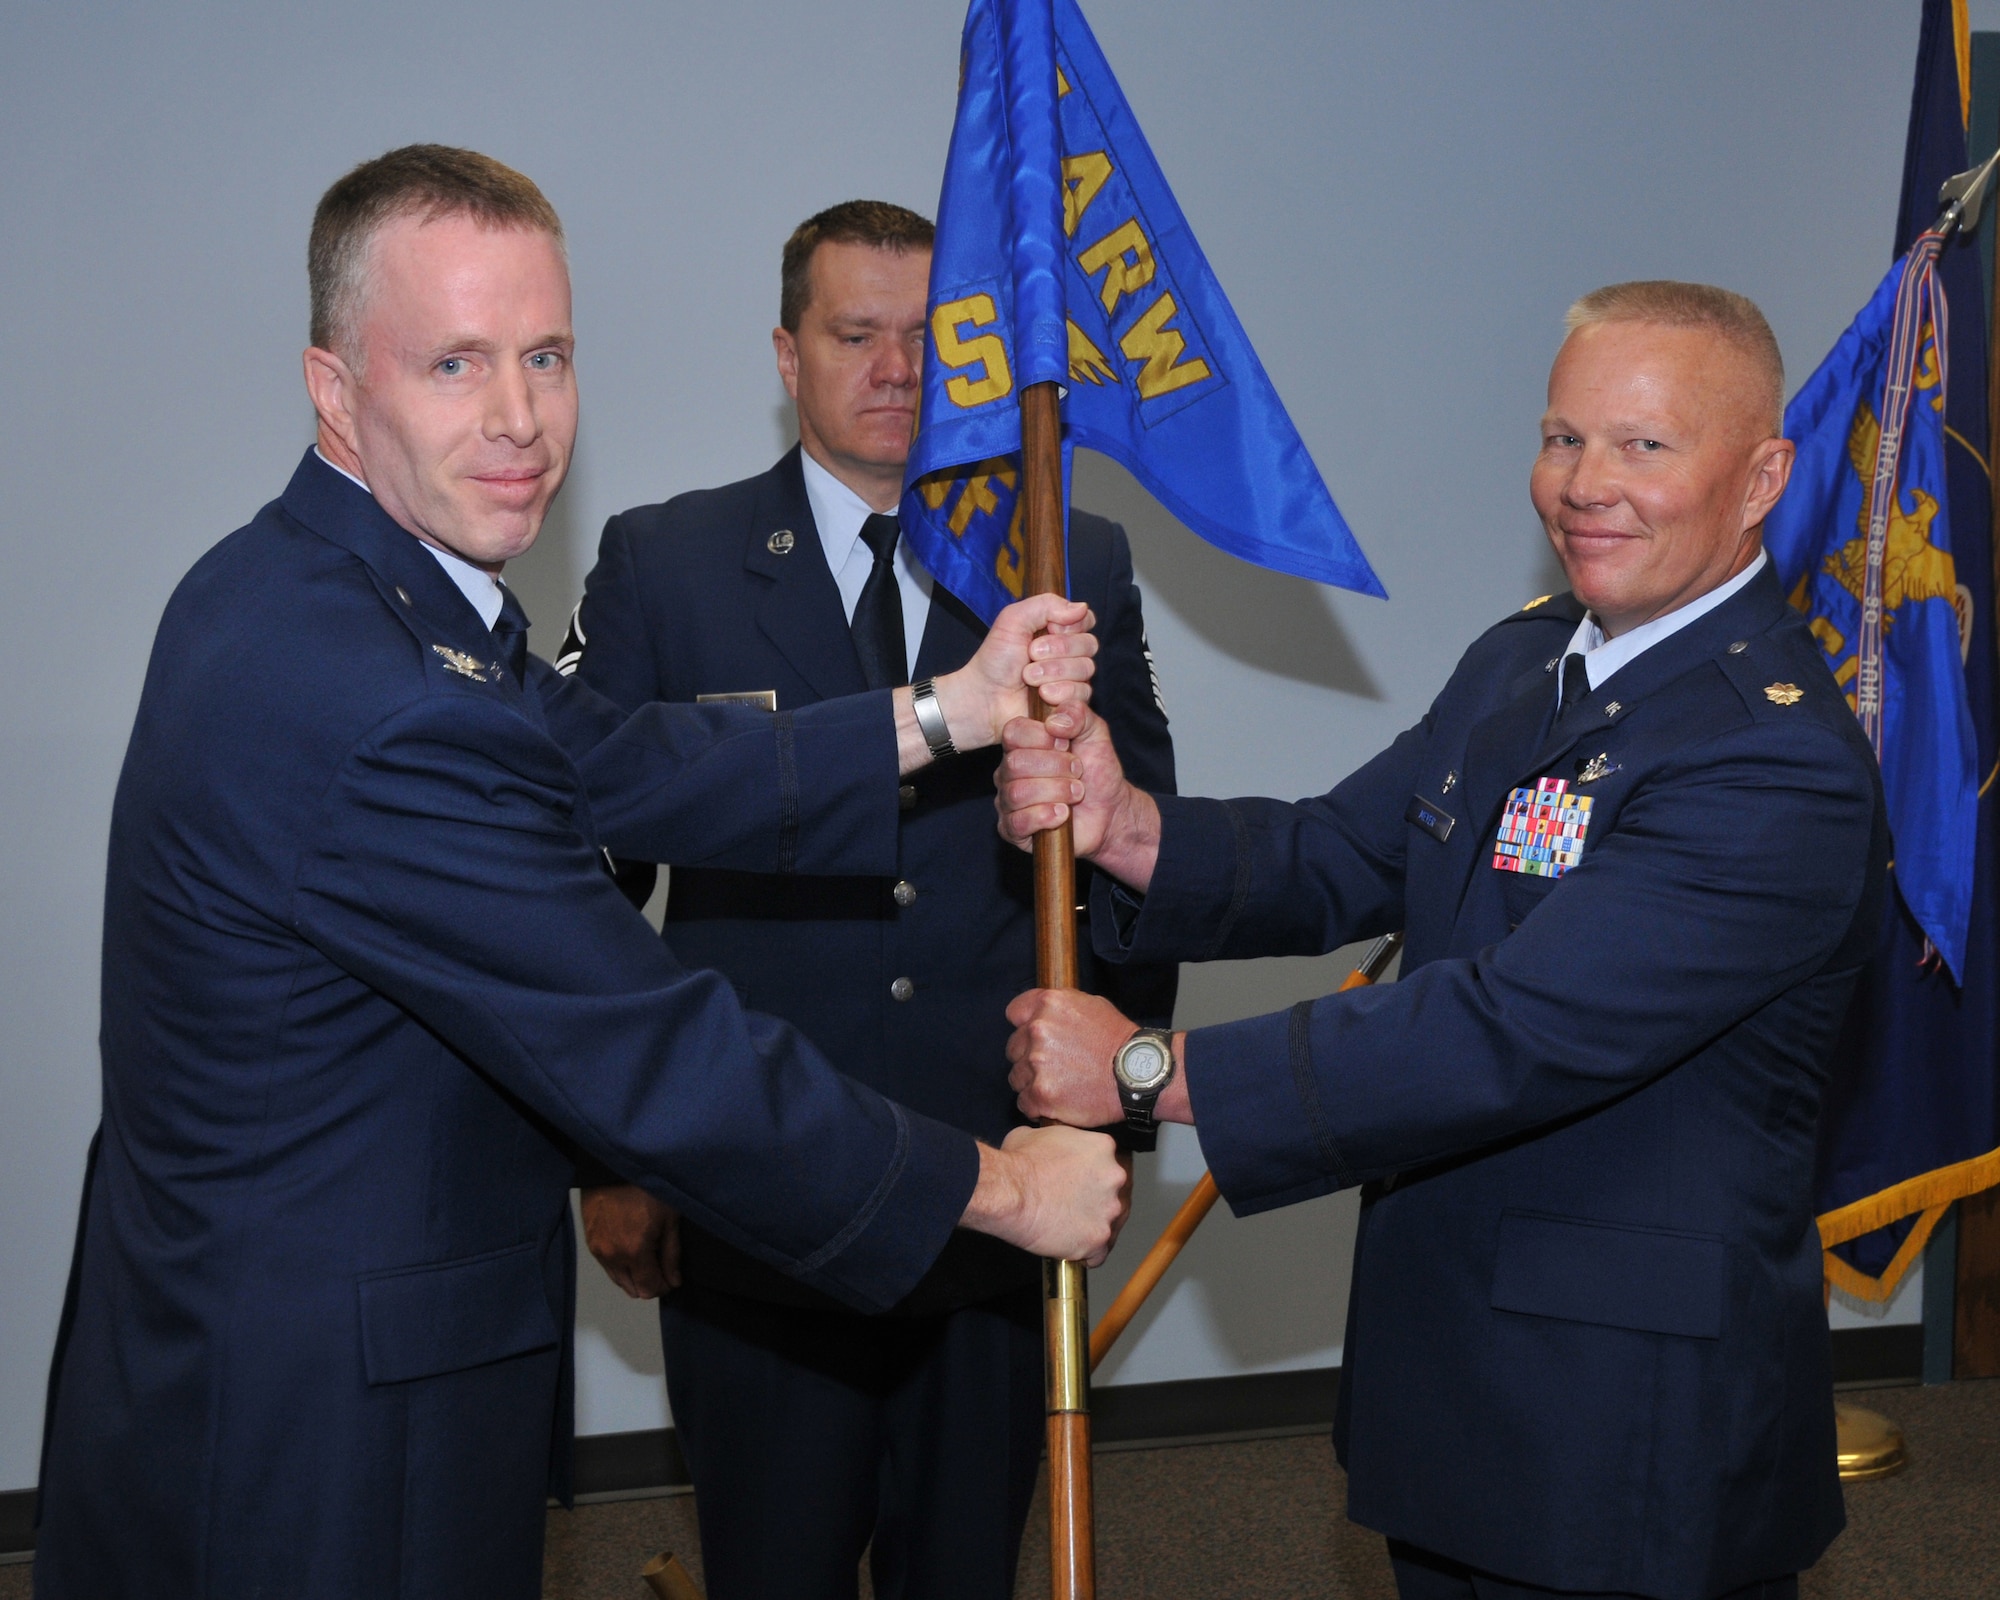 Col Kenneth L Gammon, 151st Mission Support Group commander, transfers the 151st Security Forces guidon to the new commander  Maj. David Todd Meyer during the change of command ceremony June 7 at Utah Air National Guard Base, Salt Lake City, Utah.
U.S.Air Force photo by Tech Sgt Michael D Evans
